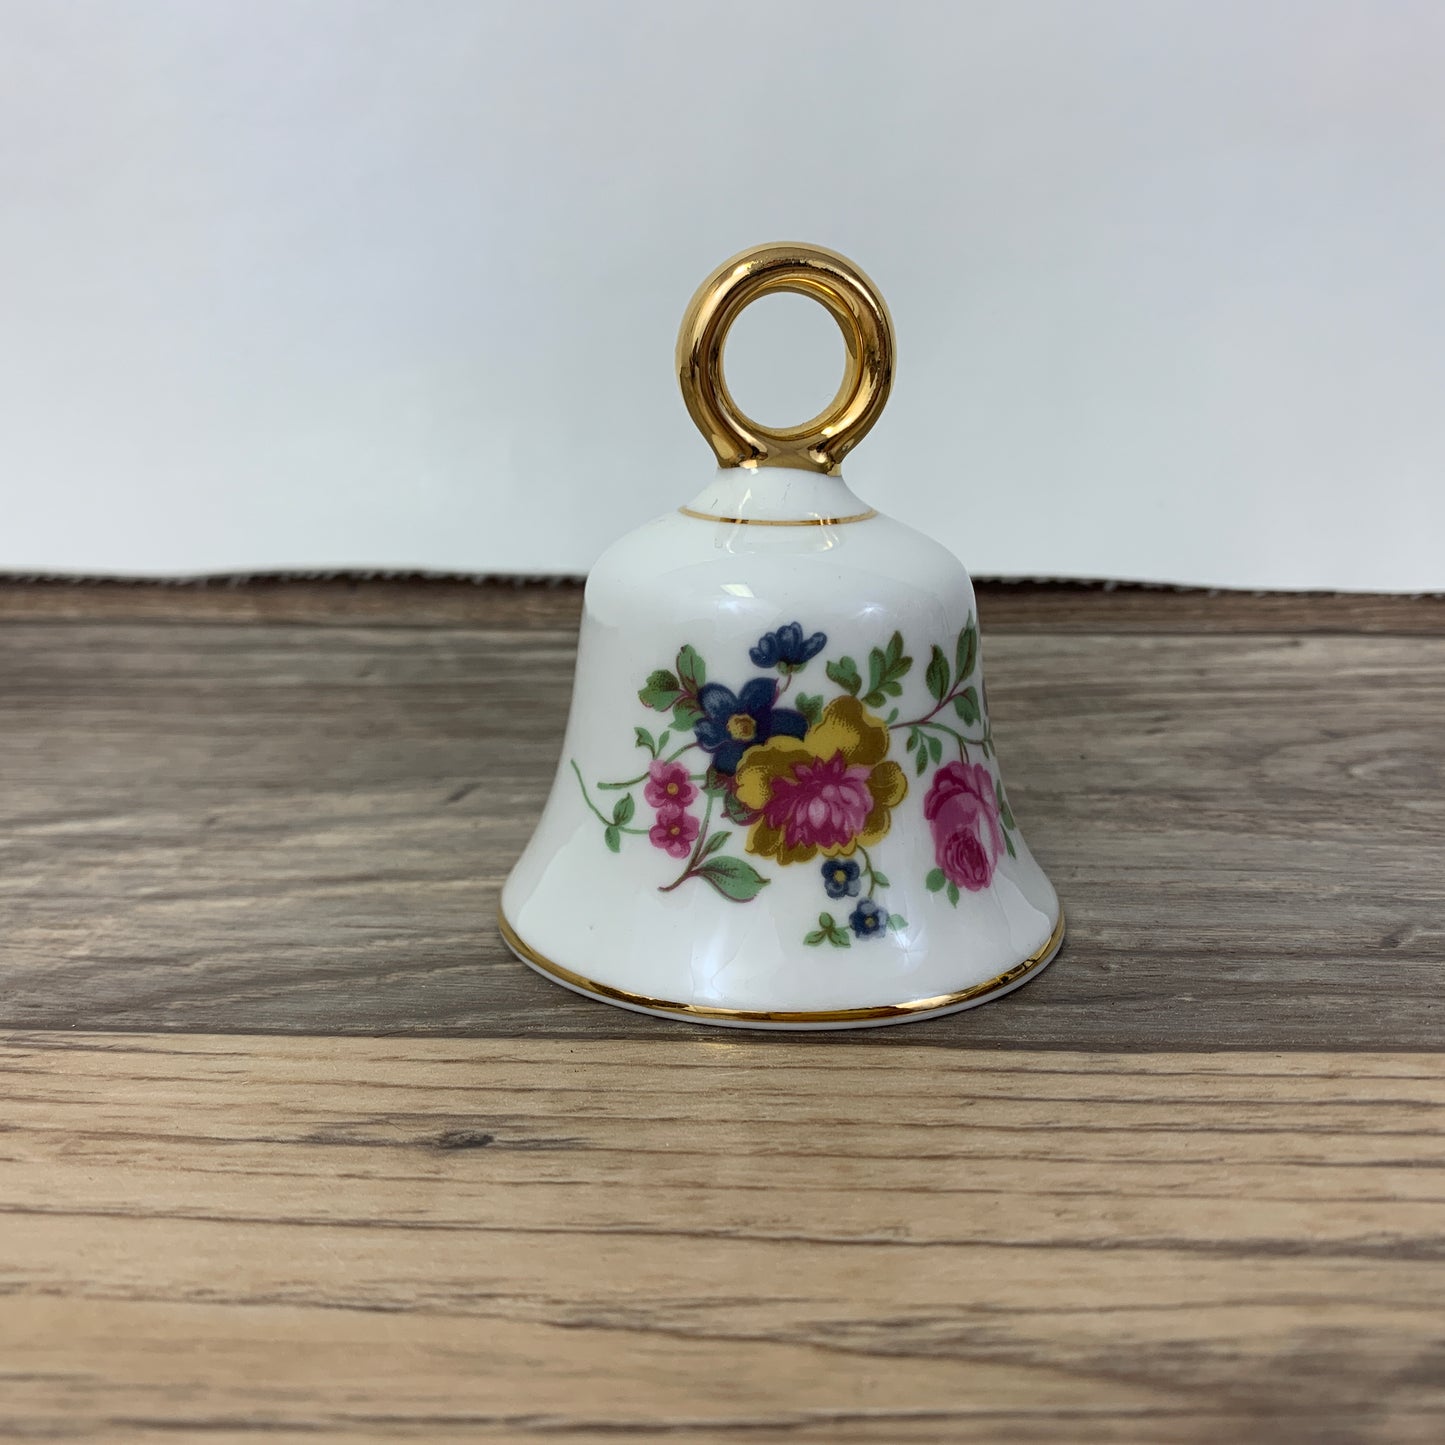 Vintage China Bell with Floral Pattern Vintage Travel Souvenir St Kitts Bell